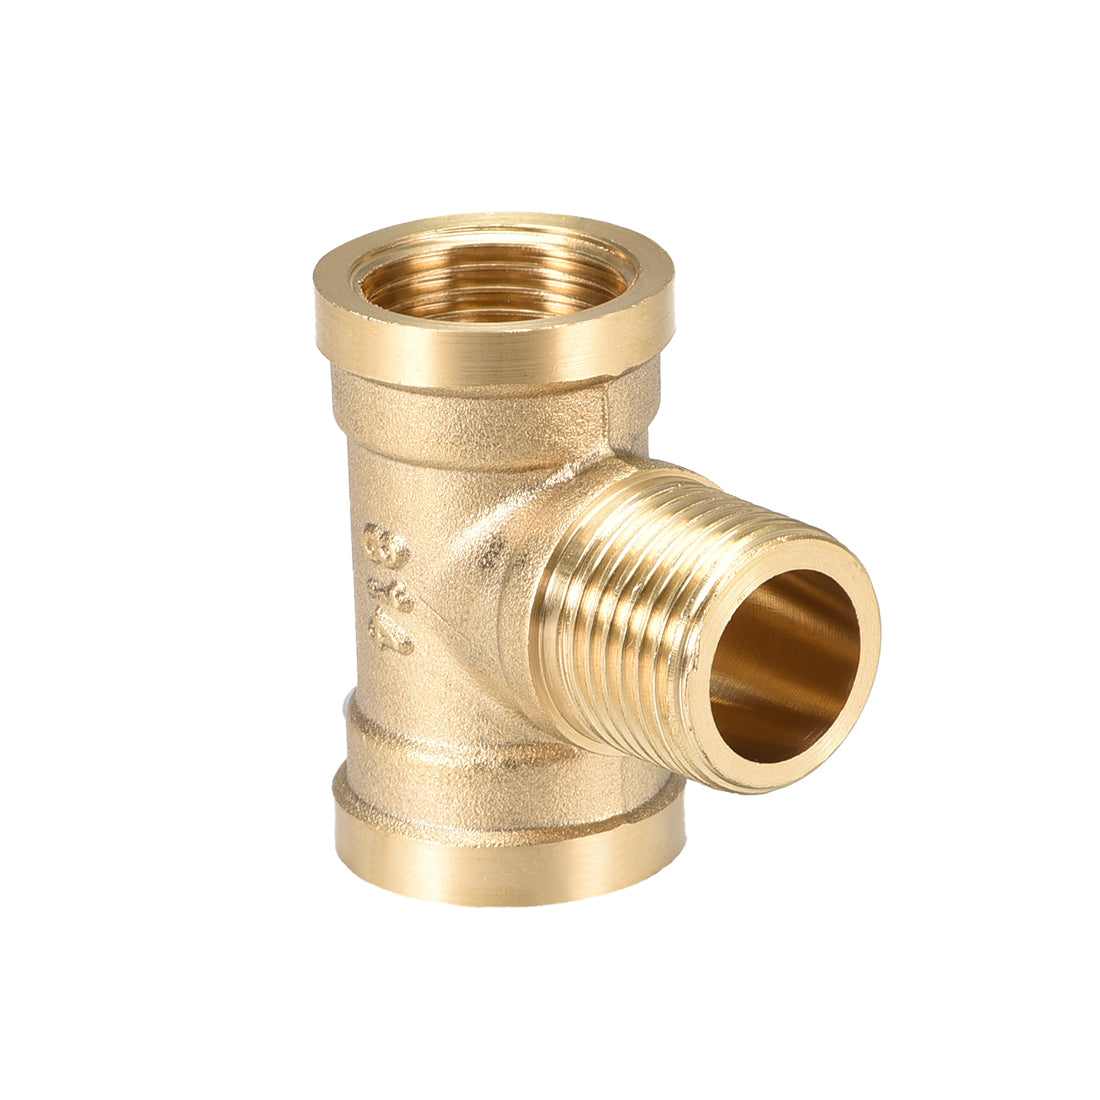 uxcell Uxcell Brass Tee Pipe Fitting G1/2 Female x G1/2 Male  x G1/2 Female T Shaped Connector Coupler